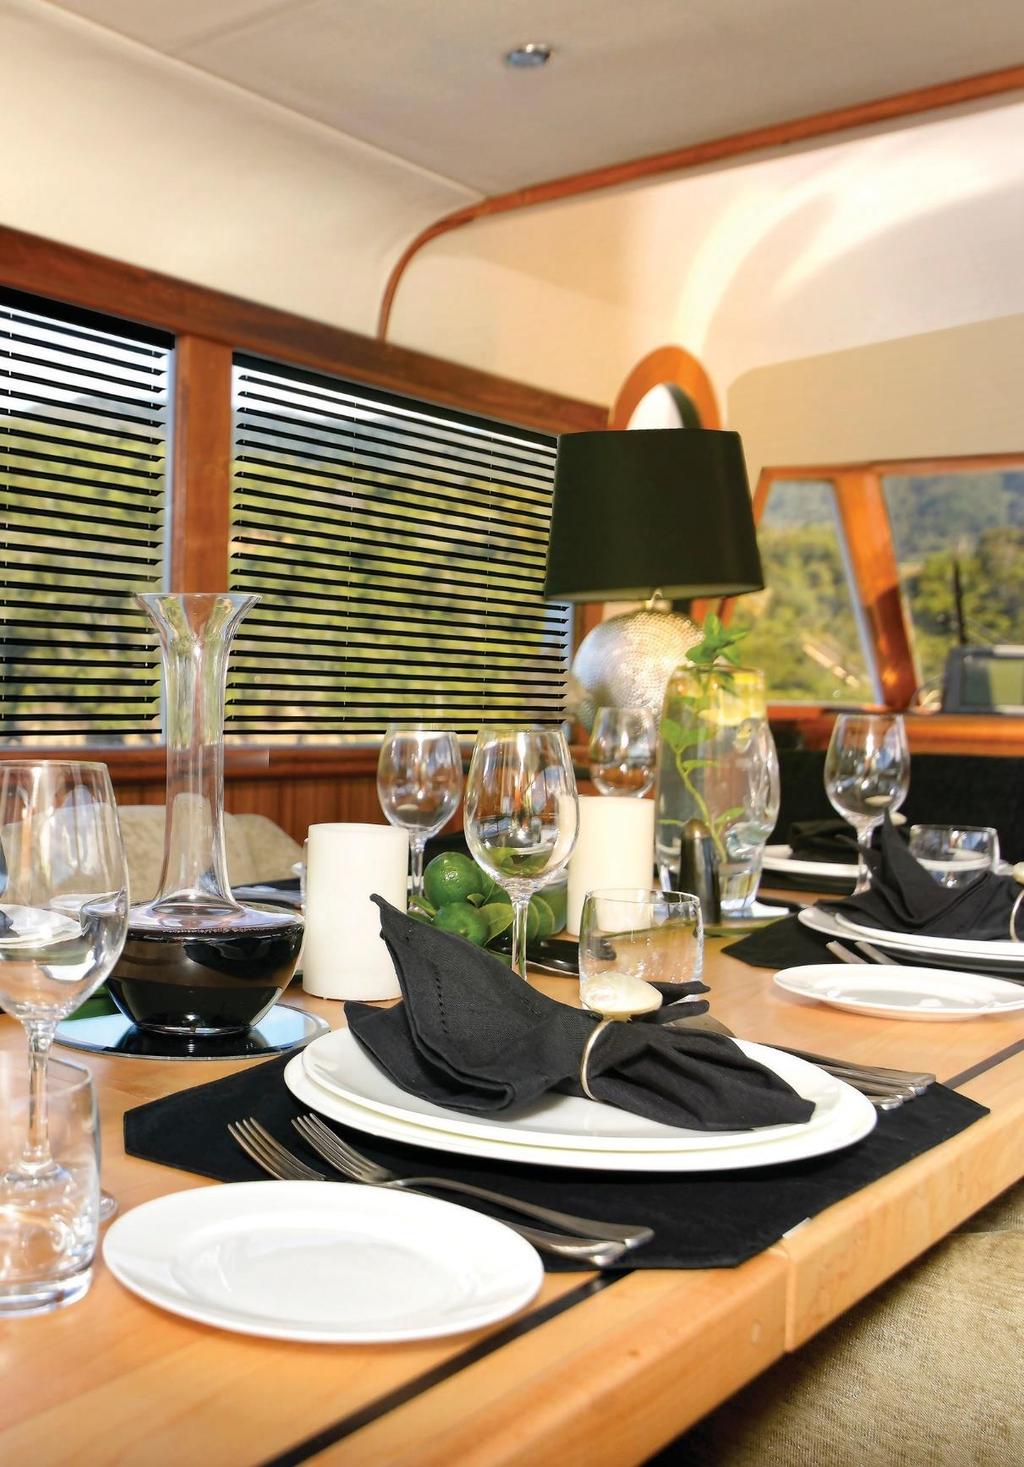 FULL DAY CRUISE PACKAGE Enjoy a six to eight hour cruise from Picton marina for a day cruise in the Marlborough Sounds (alternative collection from Bay of Many Coves Resort for a 6 hour cruise).